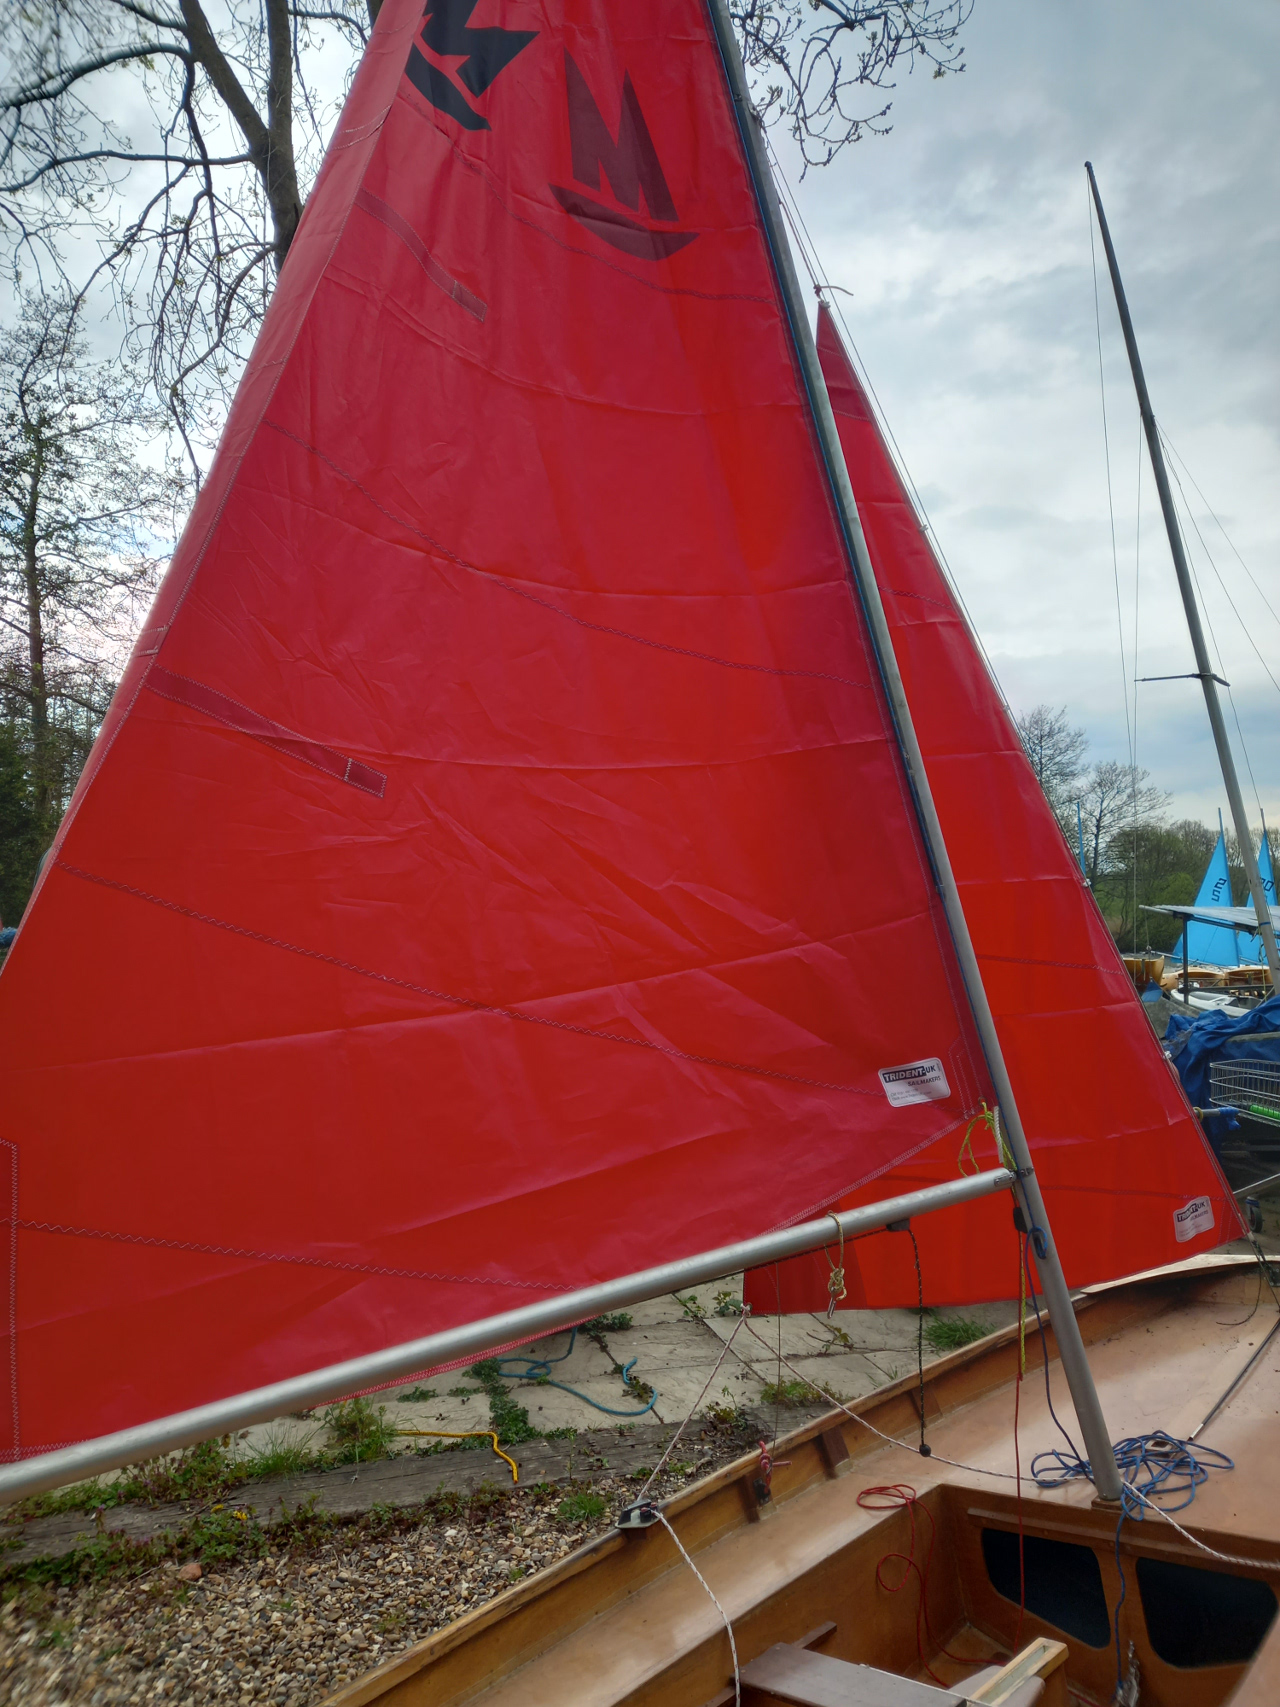 A wooden Mirror dinghy with Bermuda rig and sails with no numbers